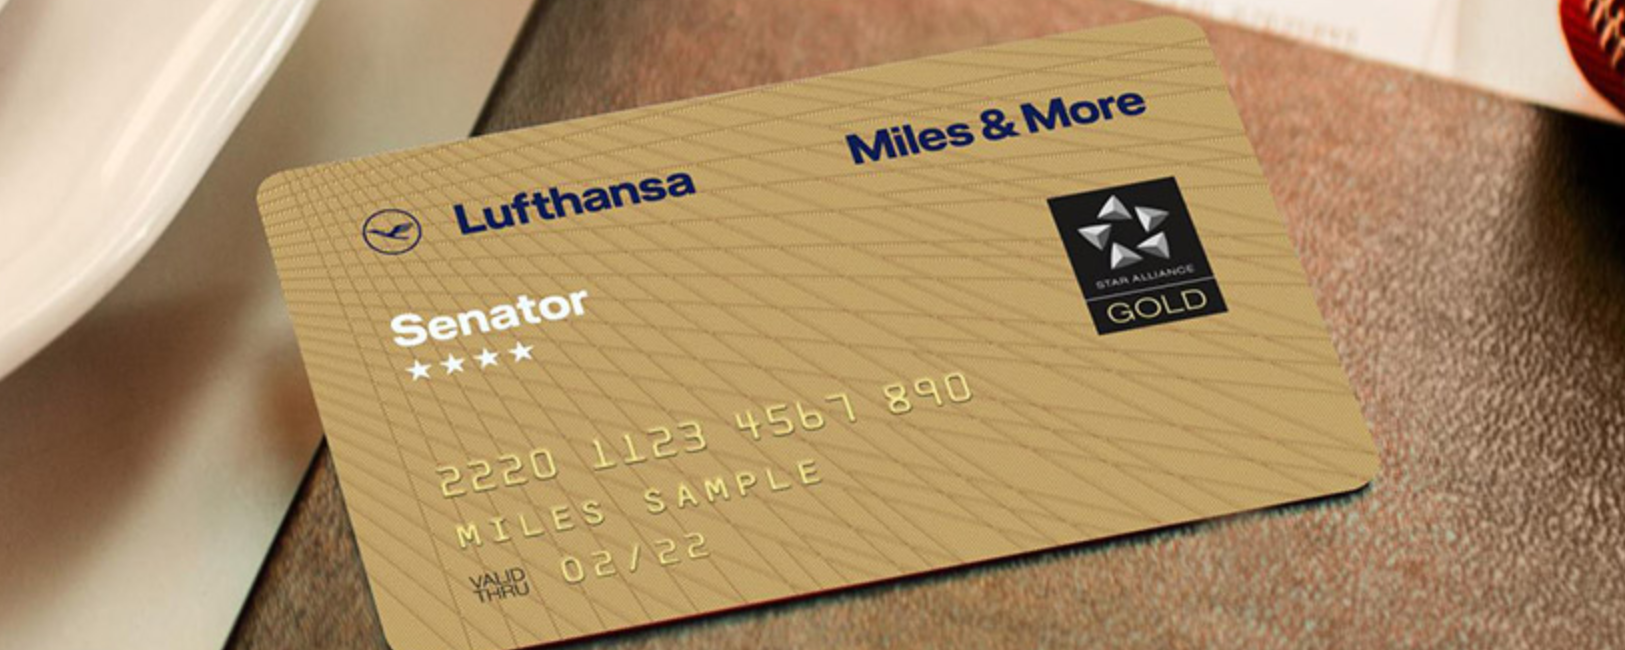 Lufthansa Offers a Free Status Match to Previous Alitalia Frequent Flyers